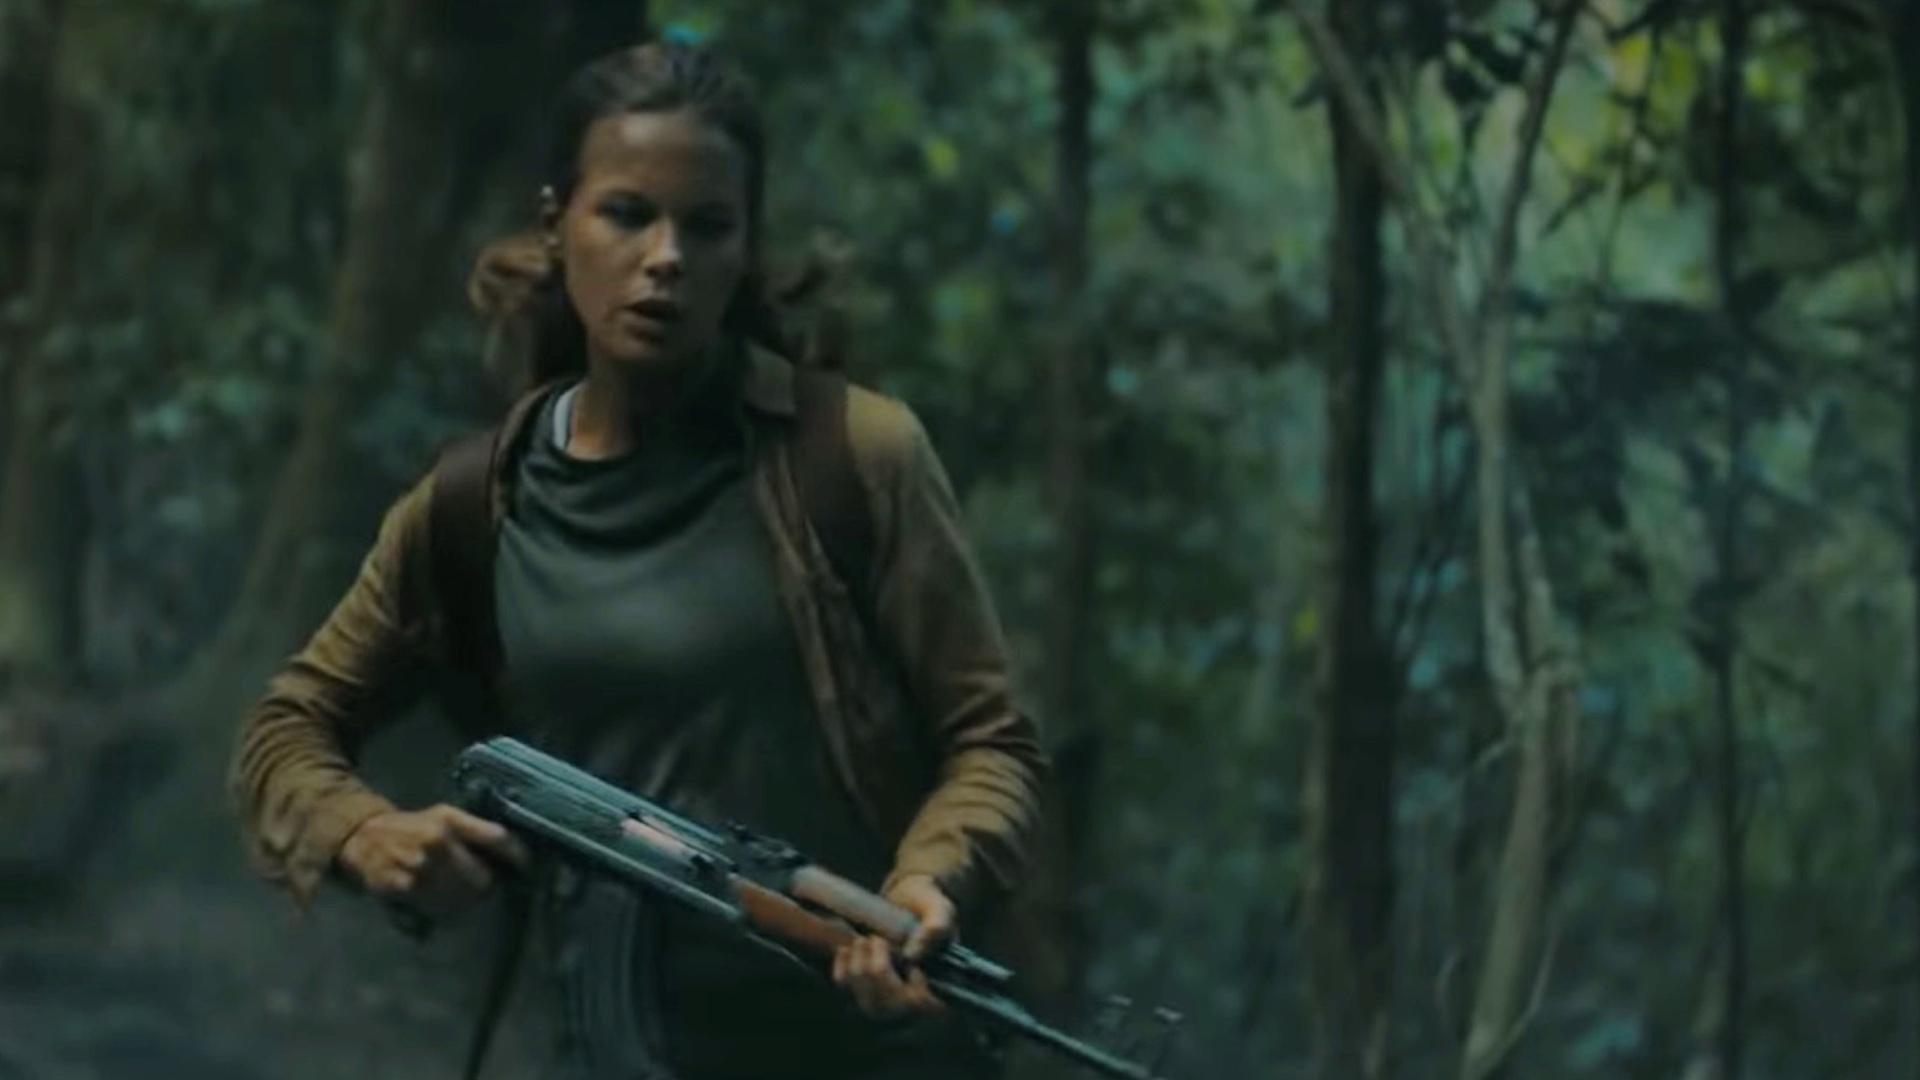 Kate Beckinsale in The Widow S1 op Amazon Prime Video